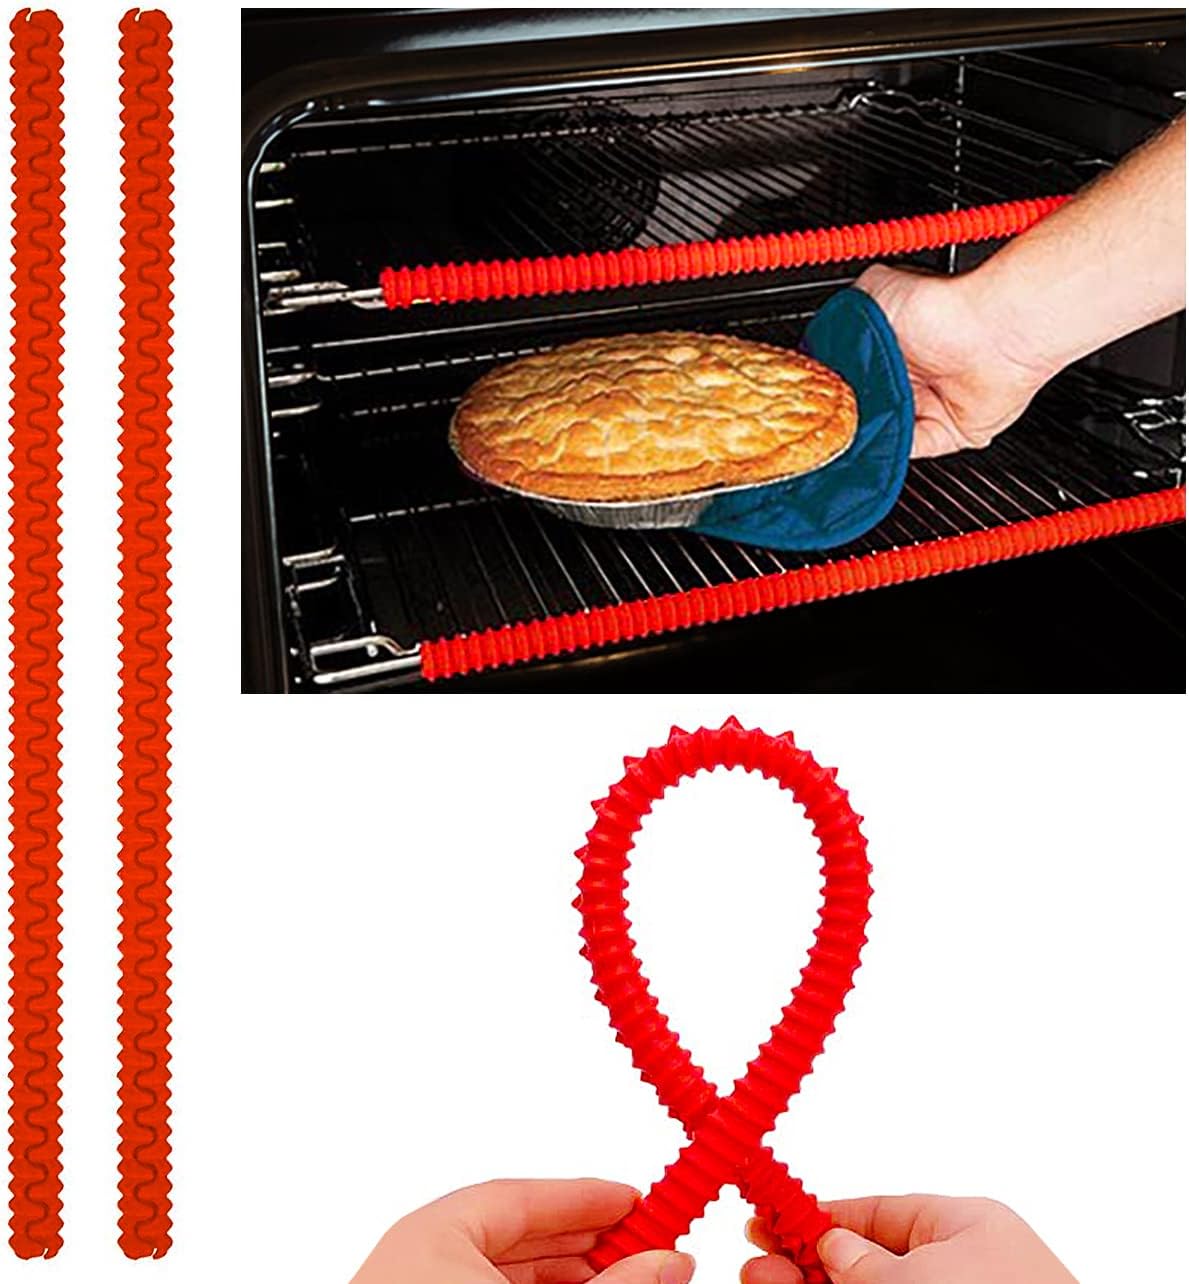 14" Oven Rack Shields - Heat Resistant Silicone Protectors, Red, Set of 2